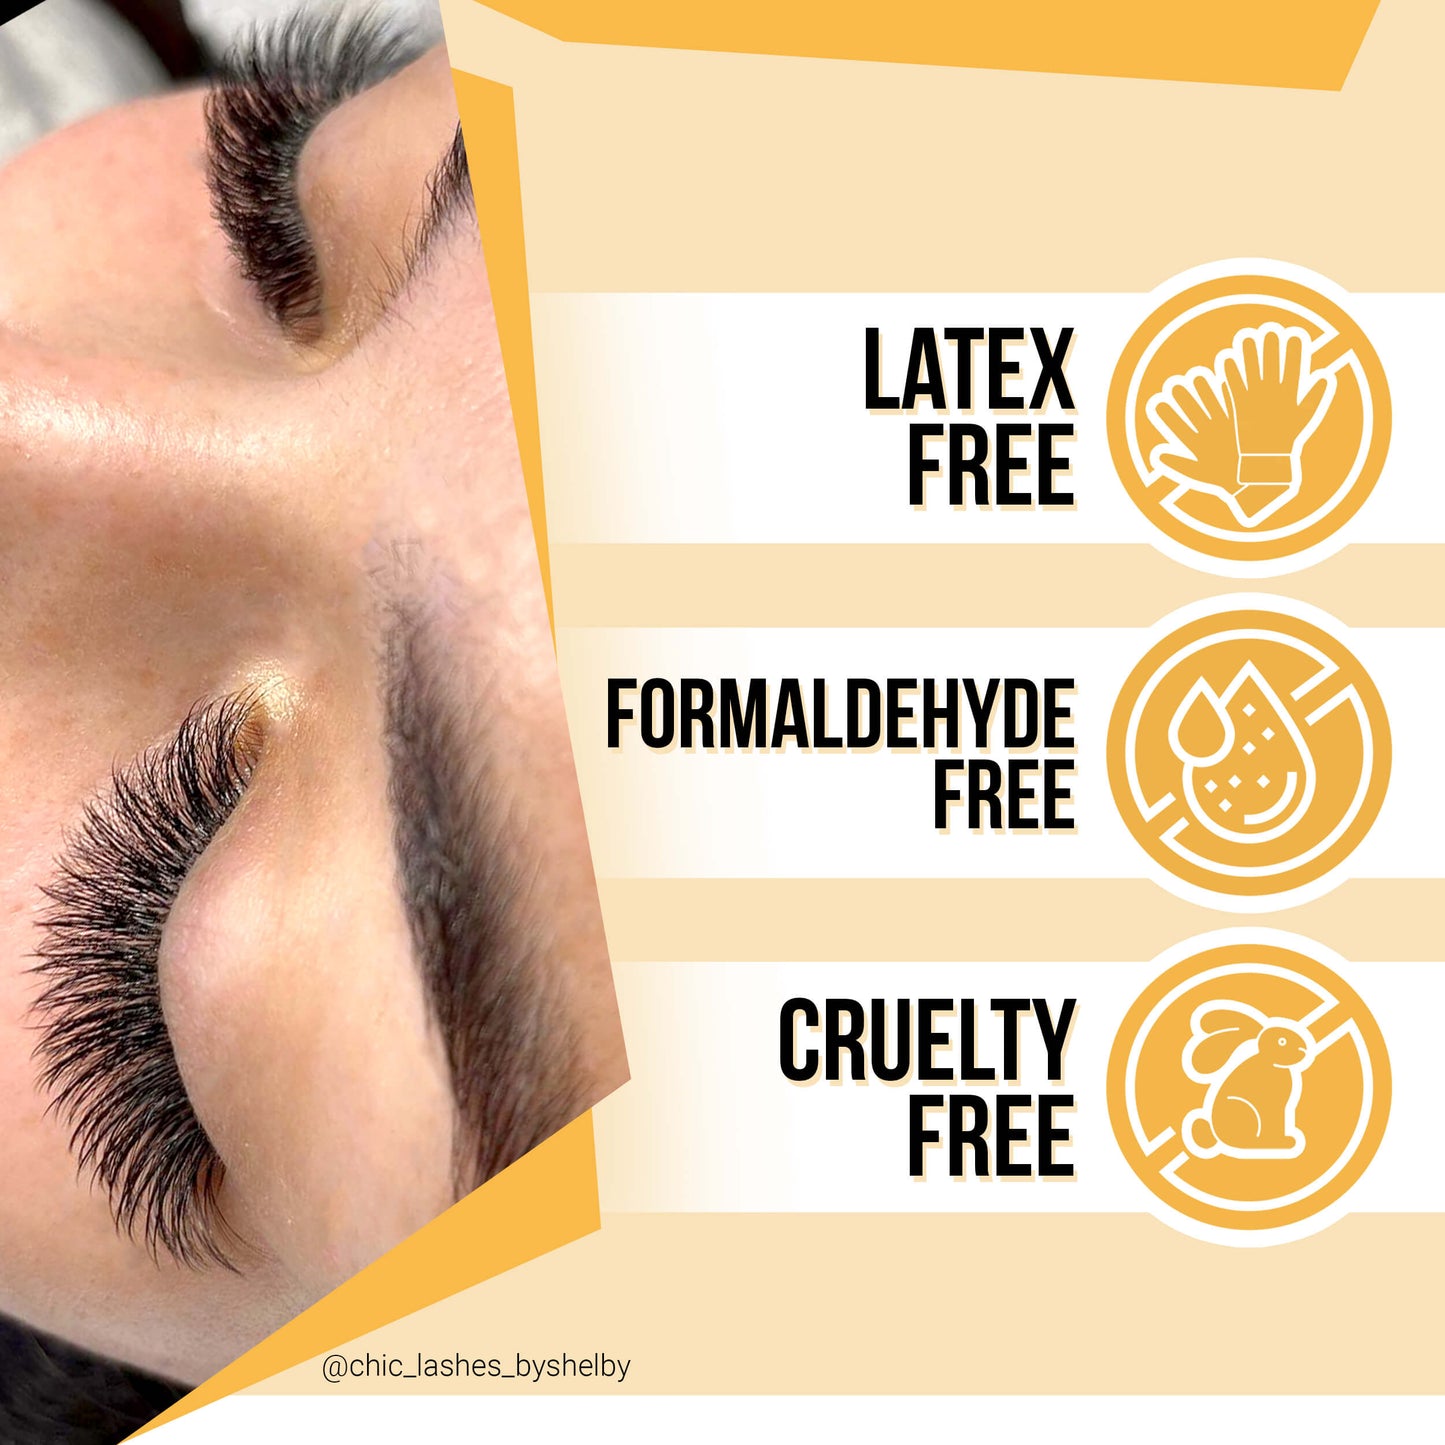 Elite Eyelash extension glue: Latex-free, formaldehyde-free, and cruelty-free formula for a safe and ethical application experience.